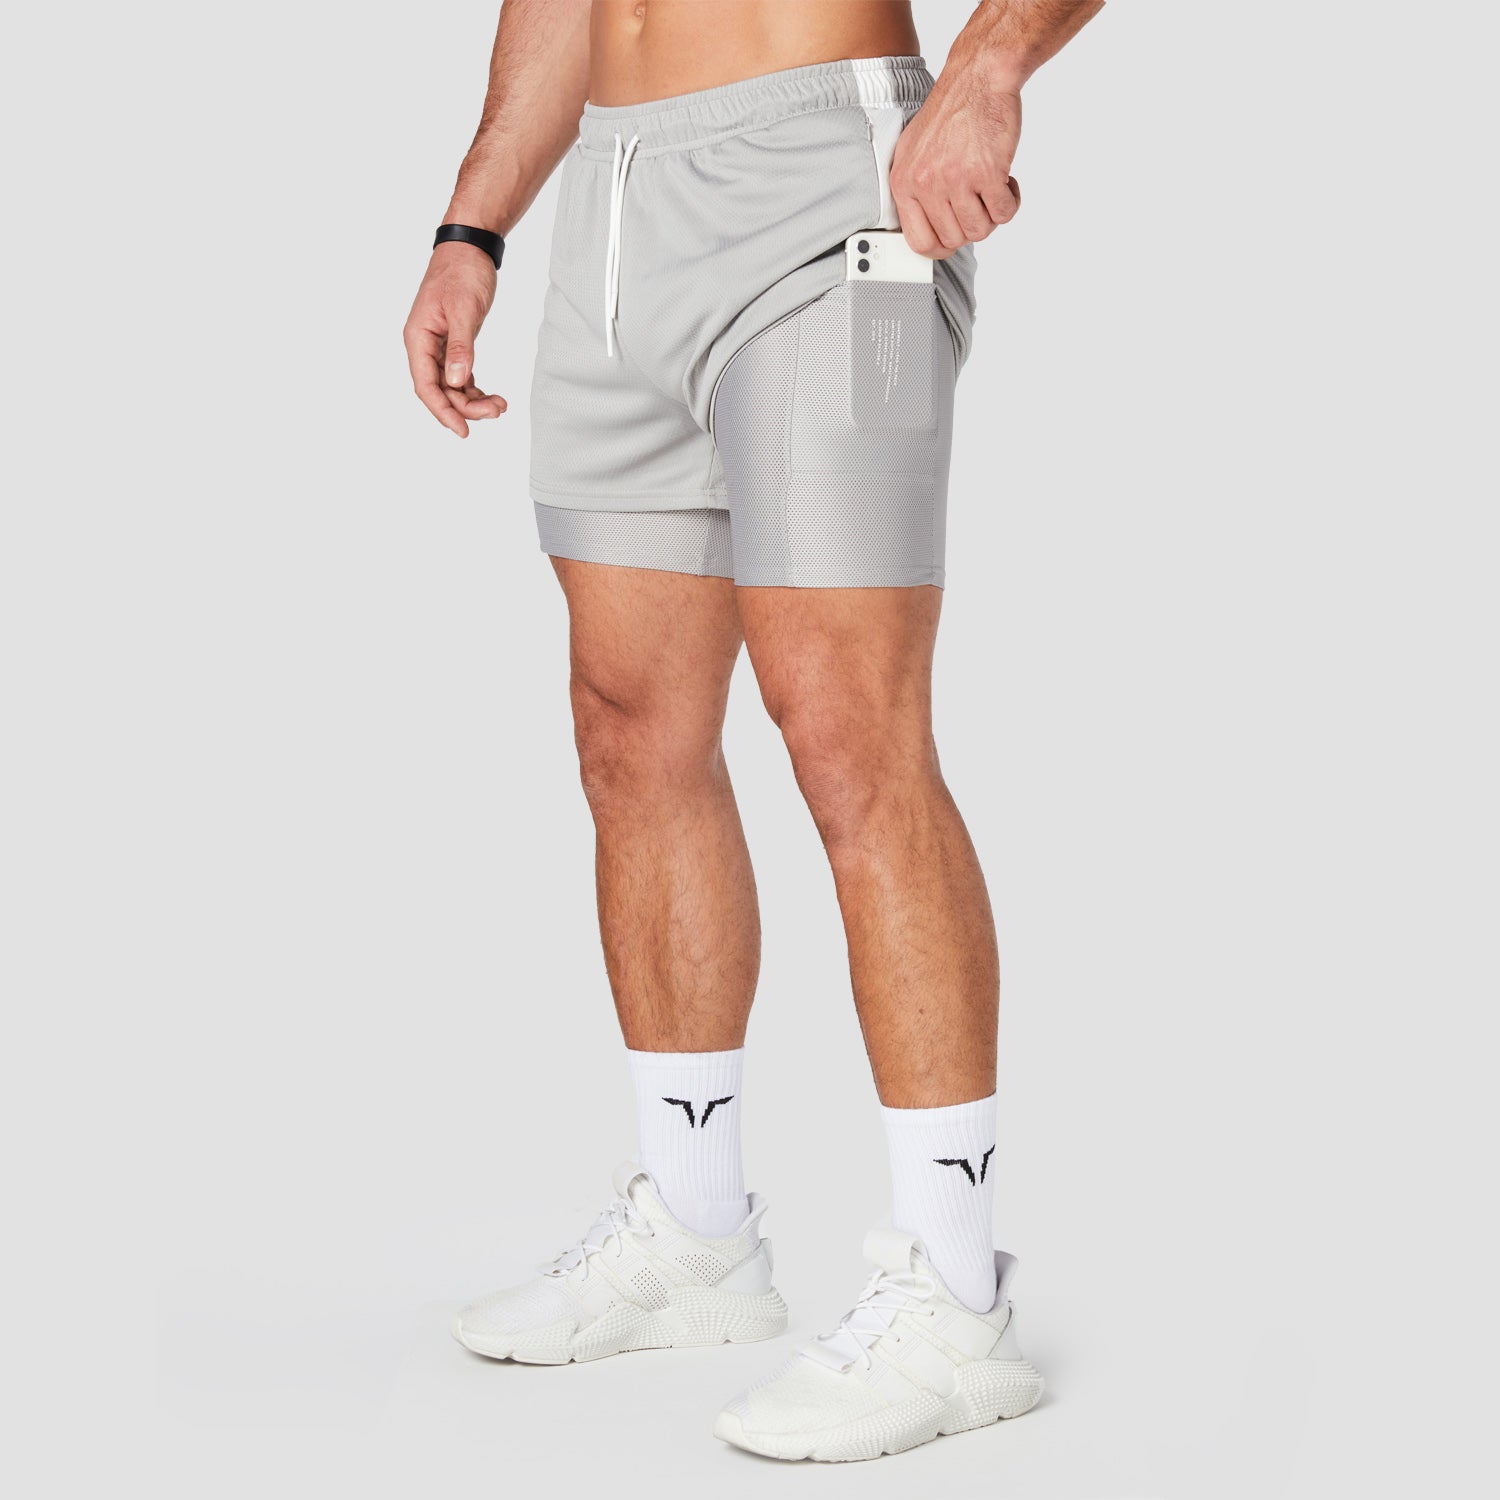 squatwolf-gym-wear-hybrid-performance-2-in-1-shorts-grey-workout-shorts-for-men